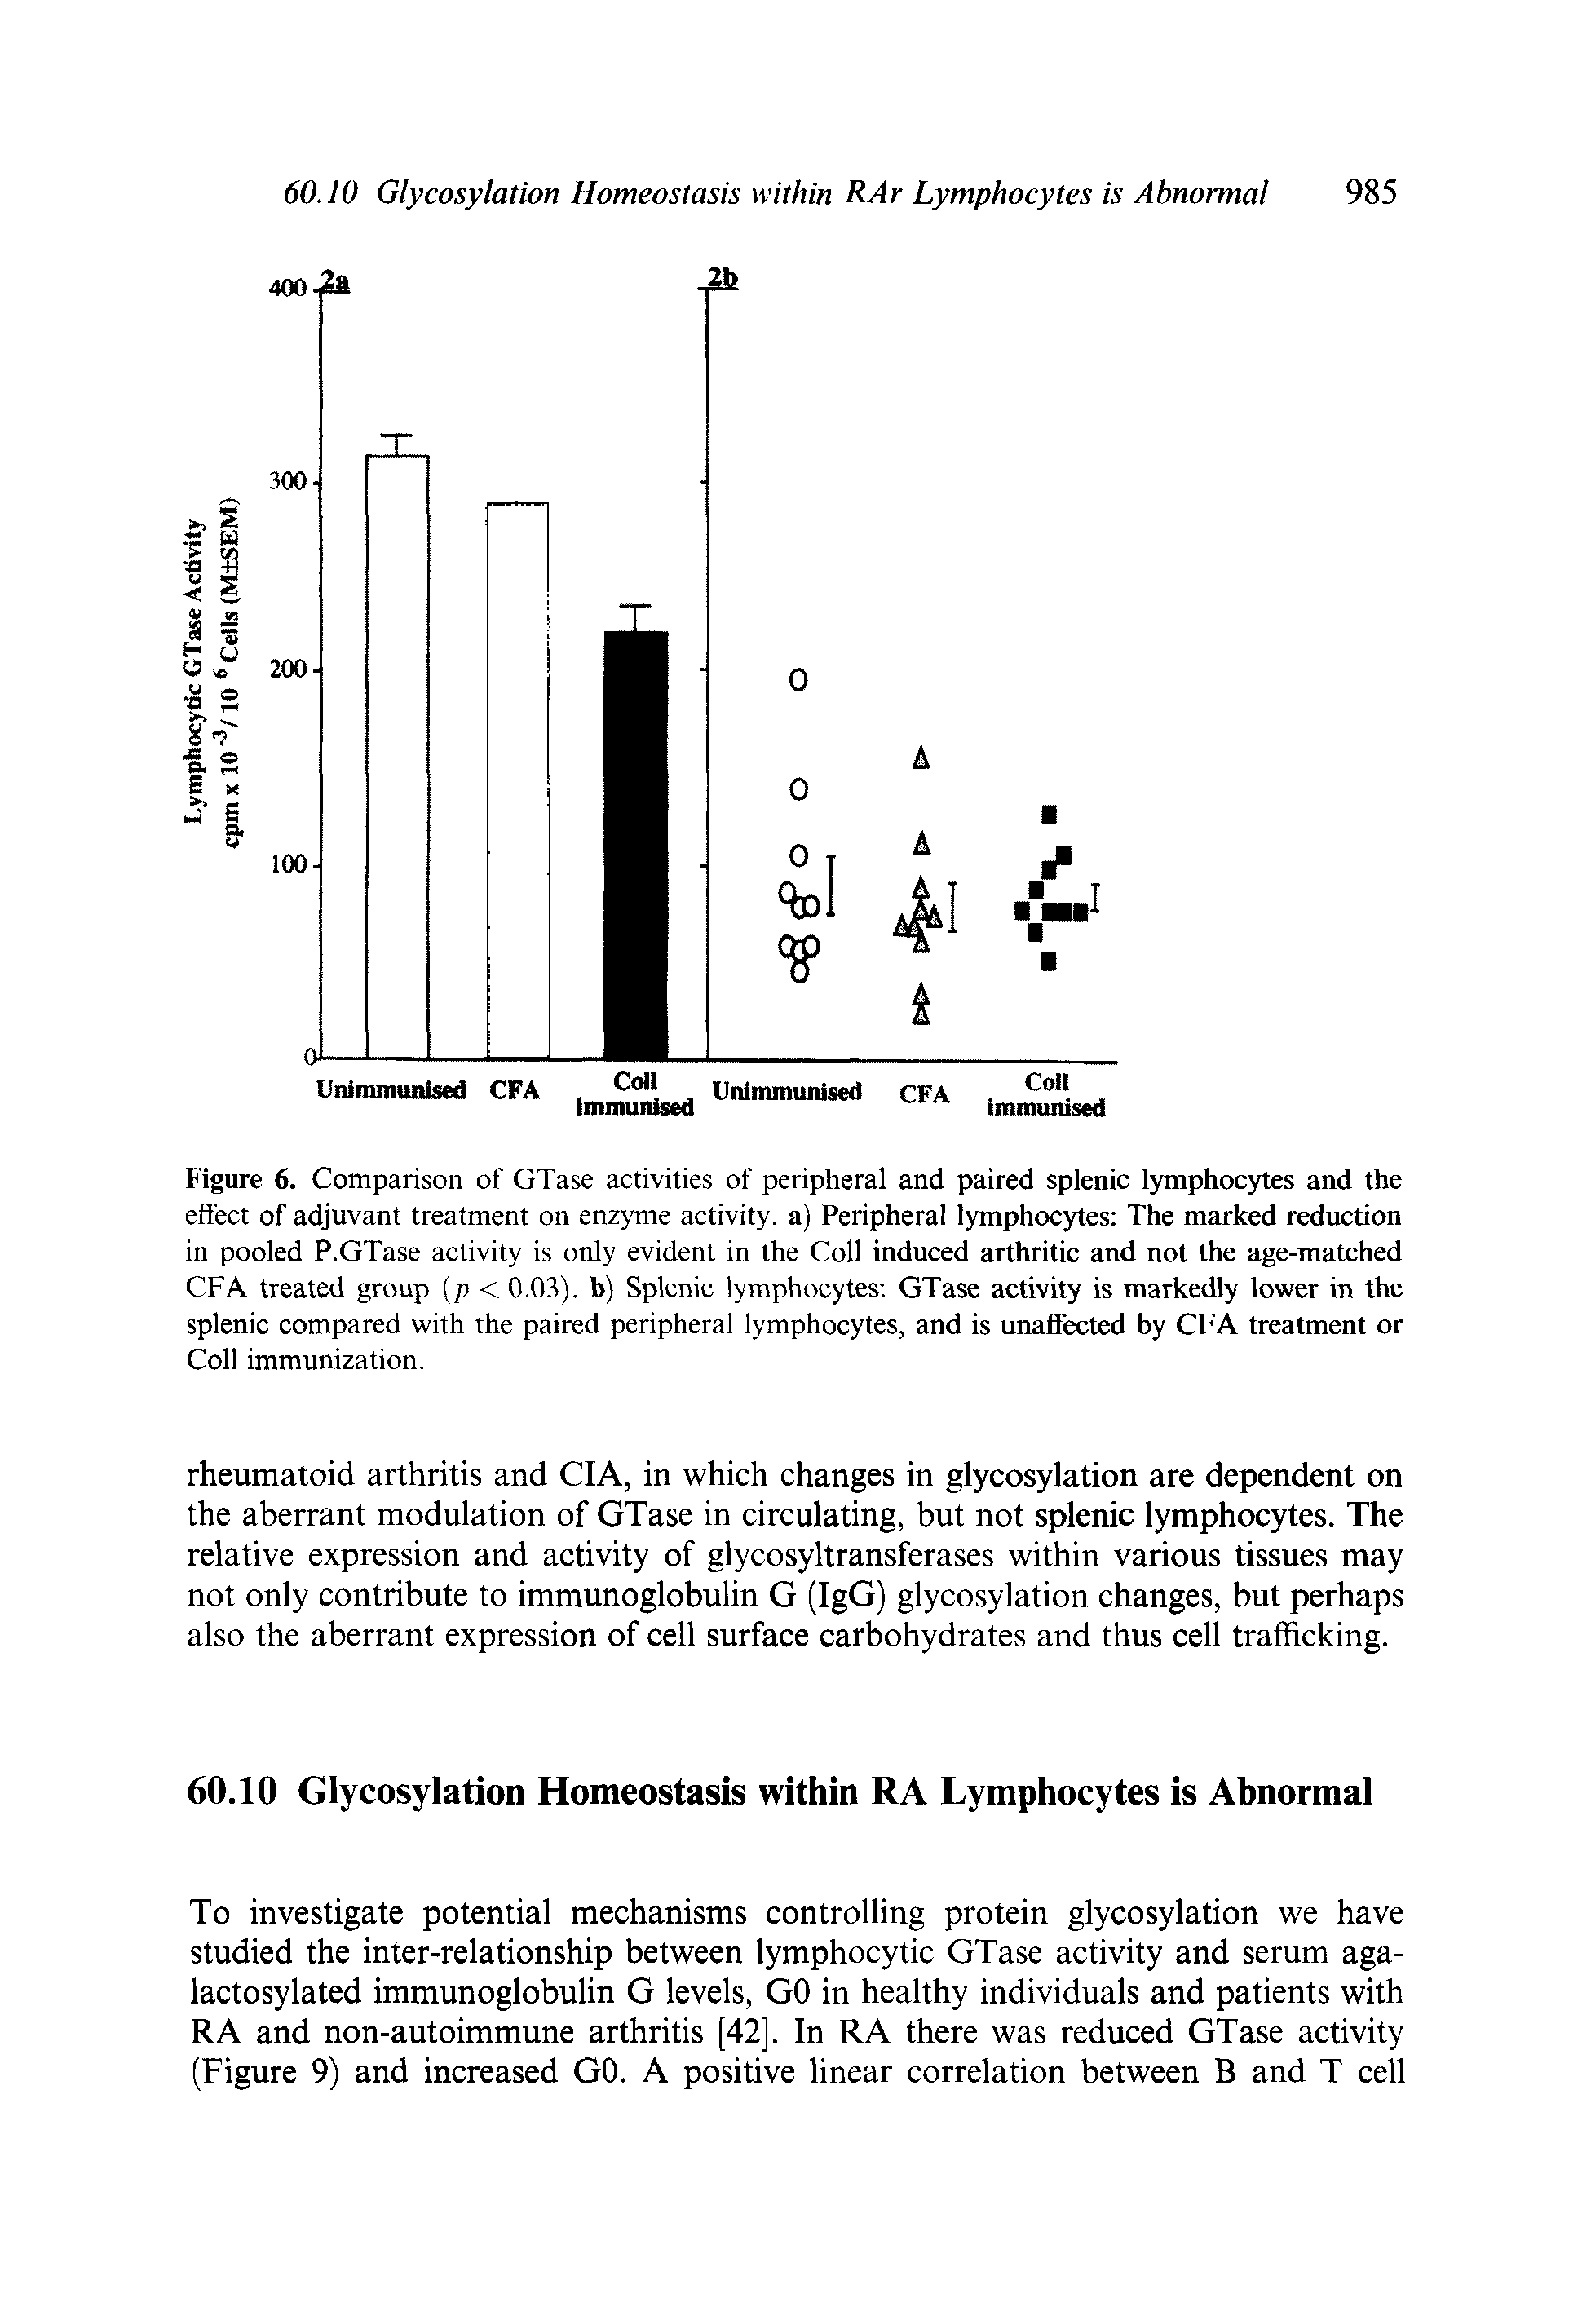 Figure 6. Comparison of GTase activities of peripheral and paired splenic lymphocytes and the effect of adjuvant treatment on enzyme activity, a) Peripheral lymphocytes The marked reduction in pooled P.GTase activity is only evident in the Coll induced arthritic and not the age-matched CFA treated group [p < 0.03). b) Splenic lymphocytes GTase activity is markedly lower in the splenic compared with the paired peripheral lymphocytes, and is unaffected by CFA treatment or Coll immunization.